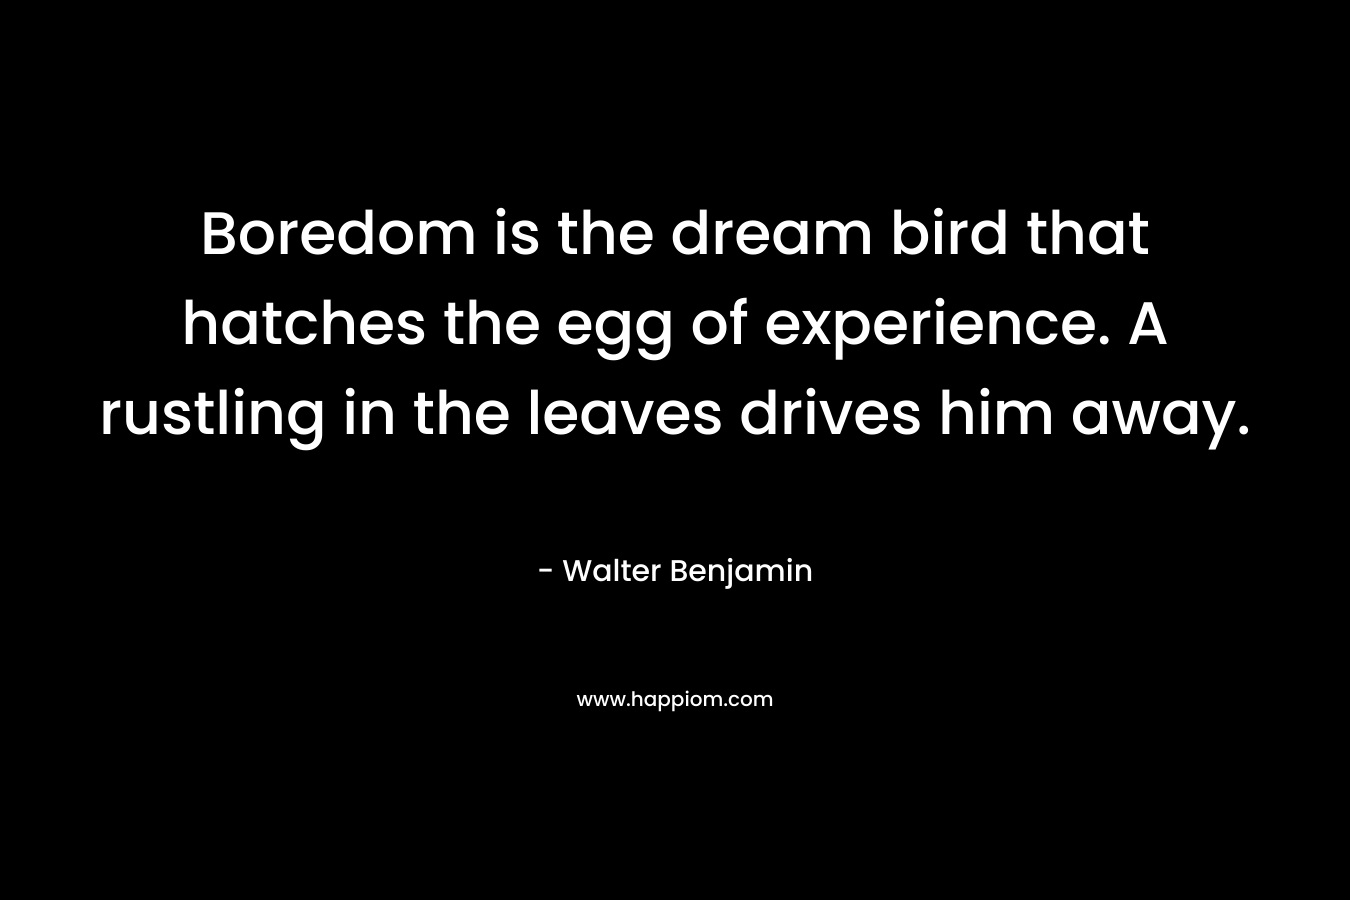 Boredom is the dream bird that hatches the egg of experience. A rustling in the leaves drives him away. – Walter Benjamin